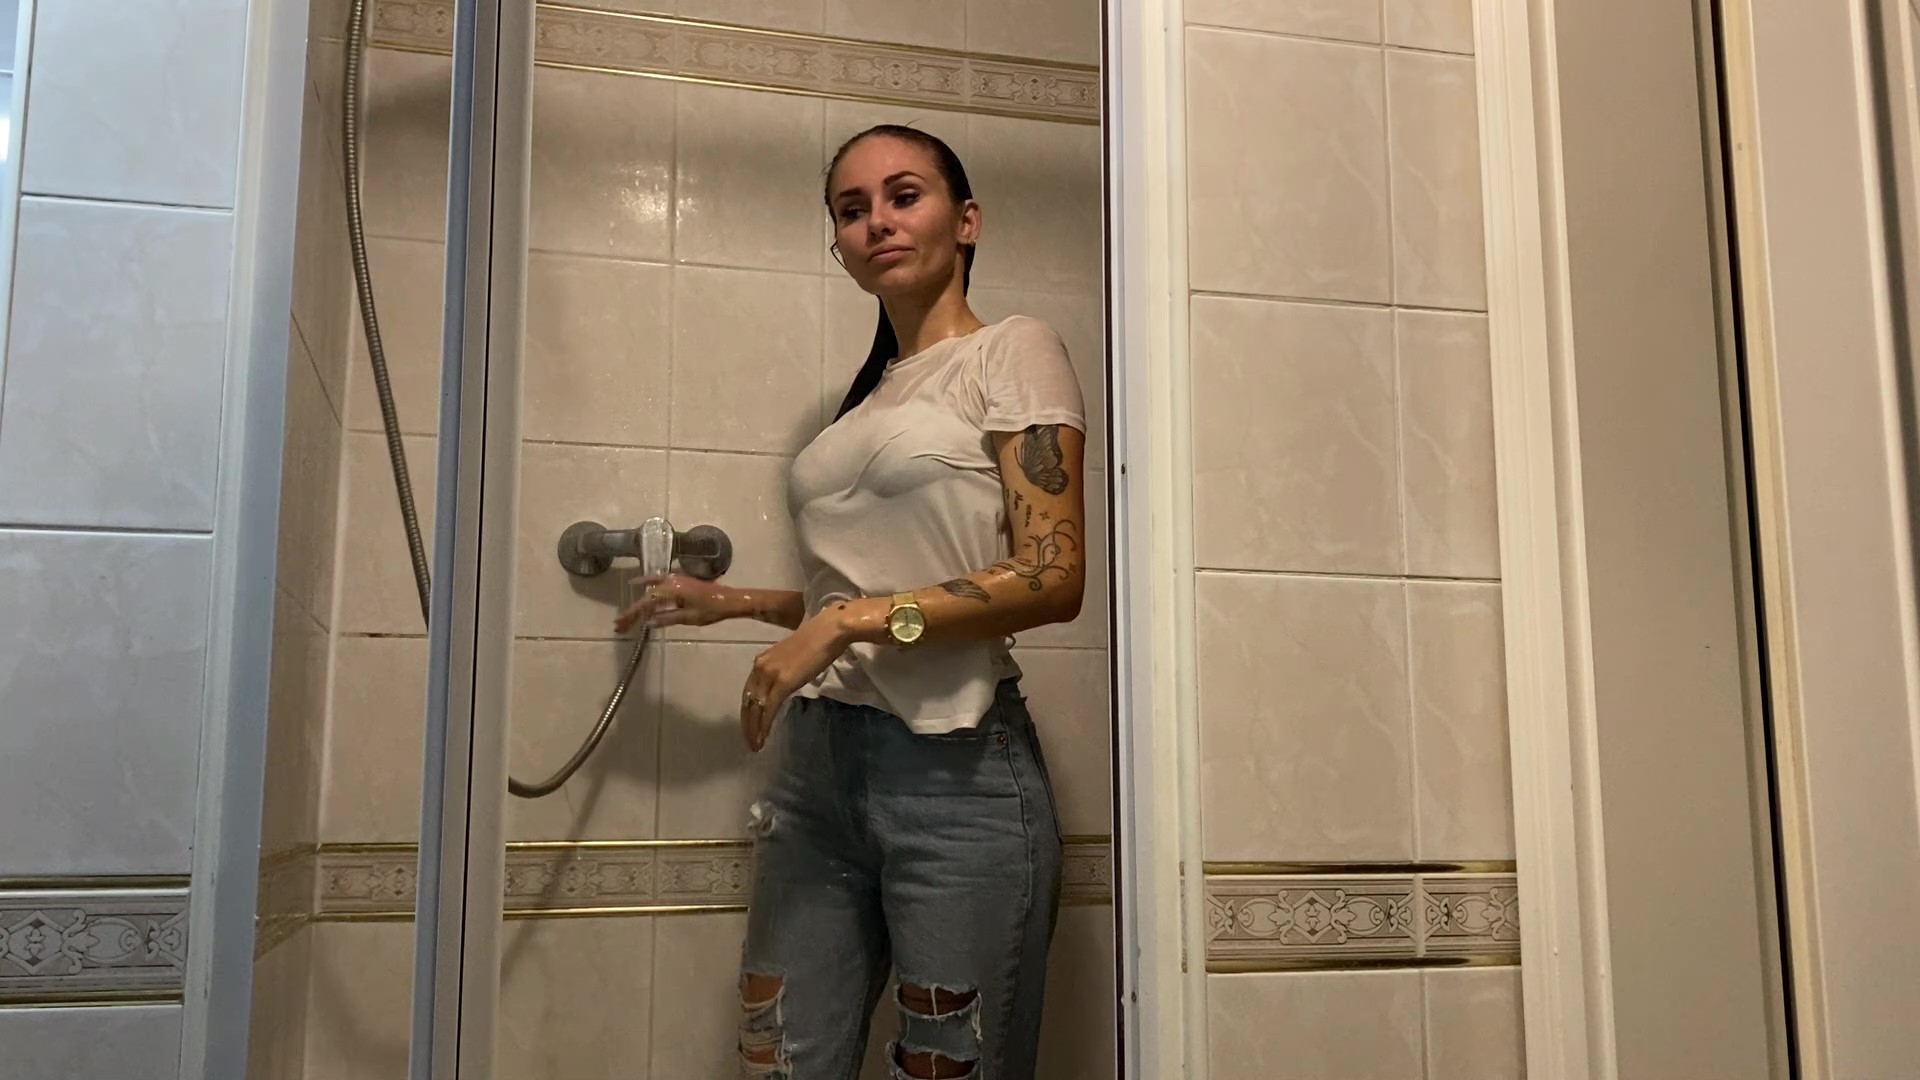 Olga takes a shower in jeans and hoodie after a hard day-1 - frame at 17m34s